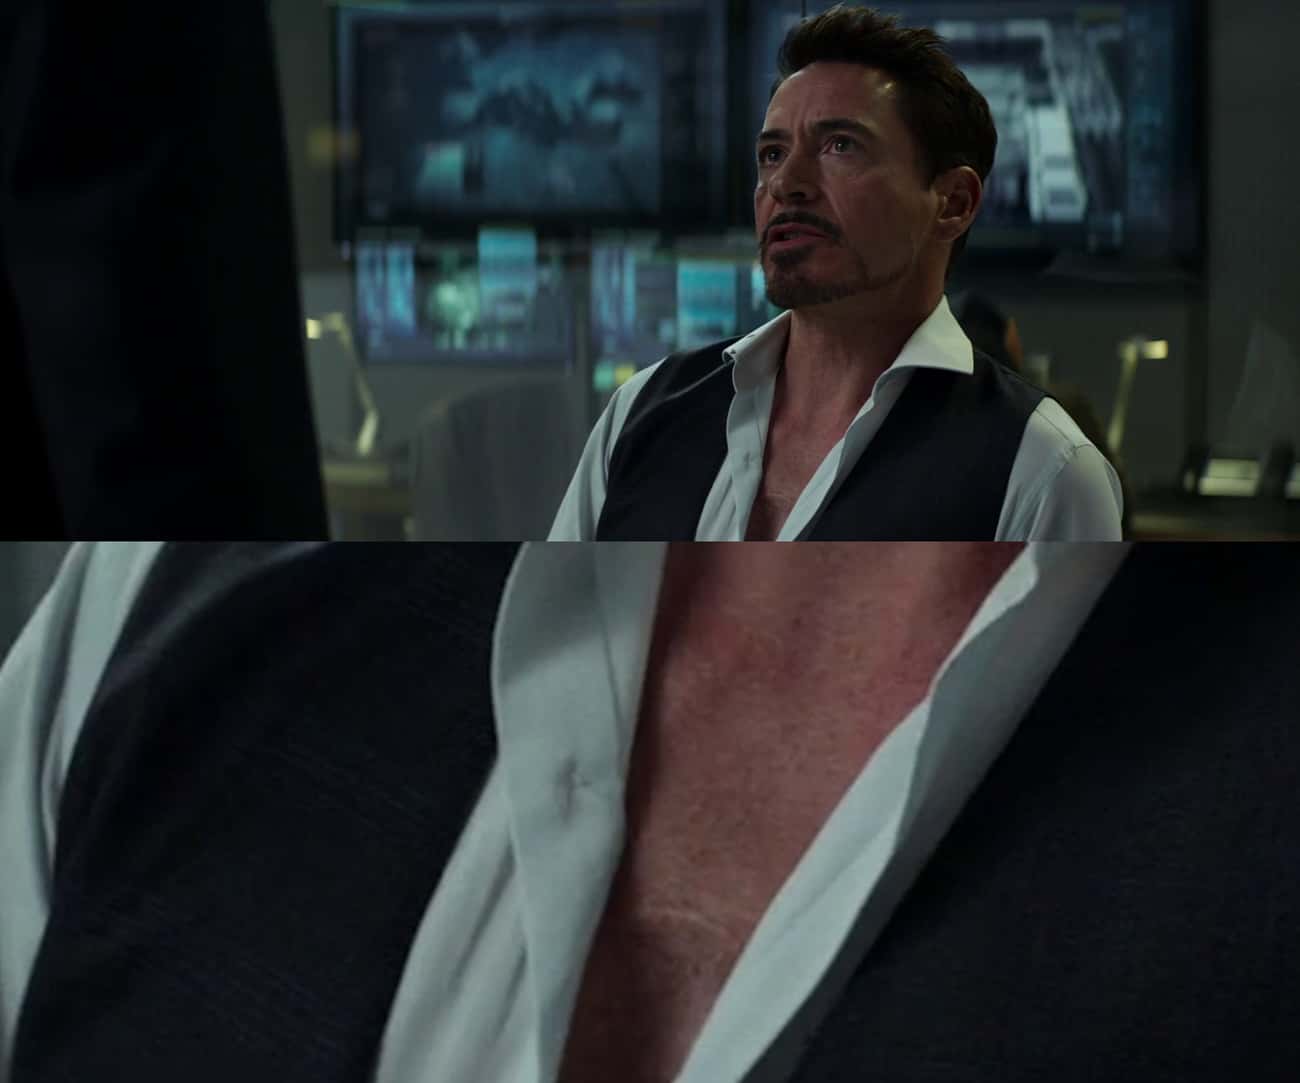 Tony's Scars Are Visible